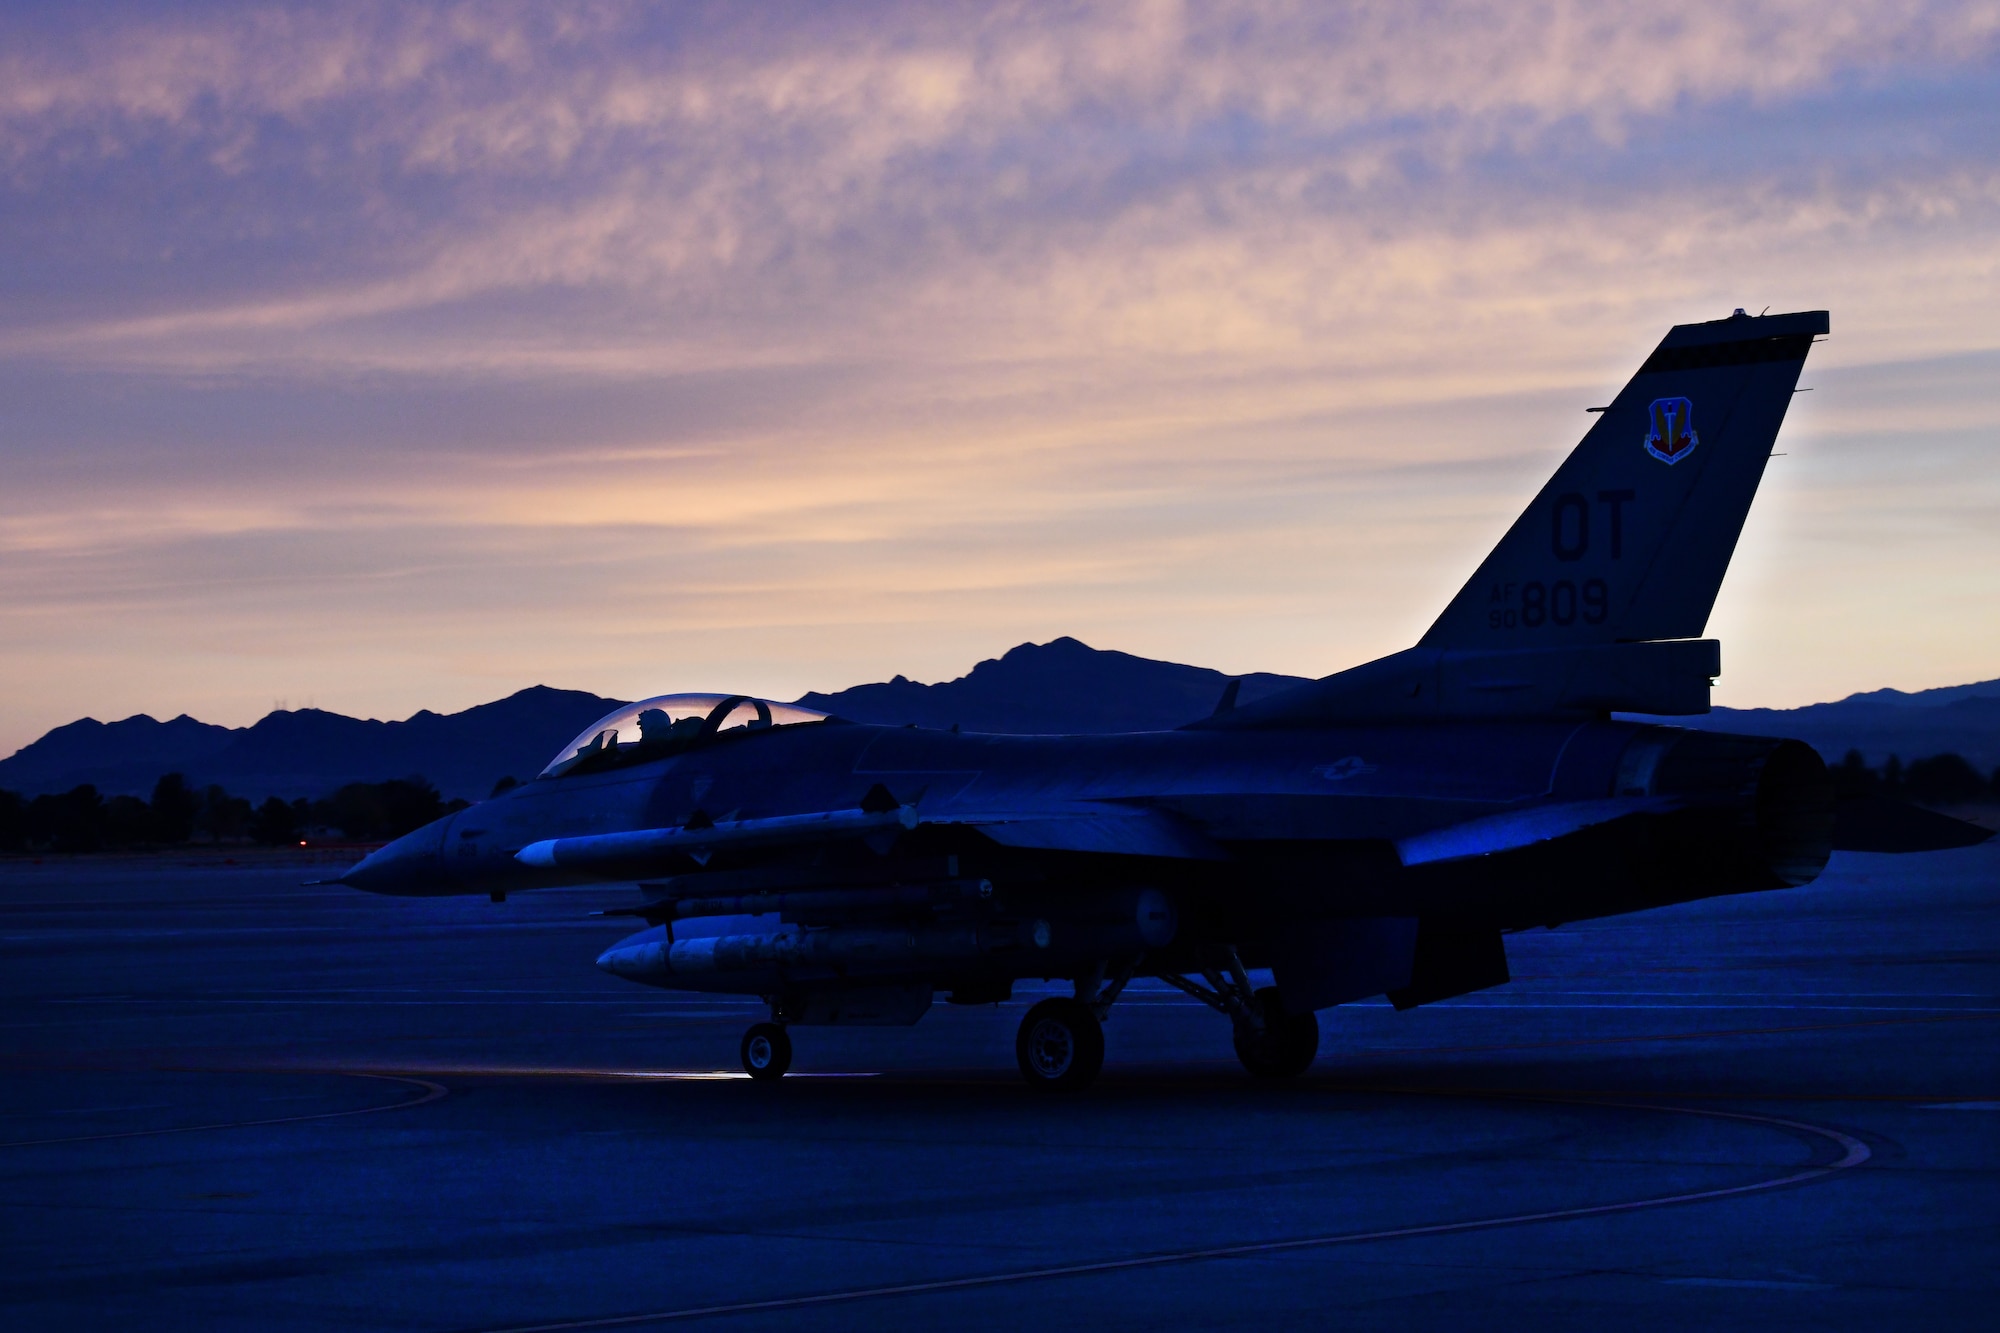 Lt. Col. Stephen Graham, 84th TES electronic warfare test director, taxis on the flight line as he prepares to conduct Force Development Evaluations of multiple systems on the F-16, Dec. 15, Nellis Air Force Base, Nev. (U.S. Air Force Photo by Major Mike Giaquinto)